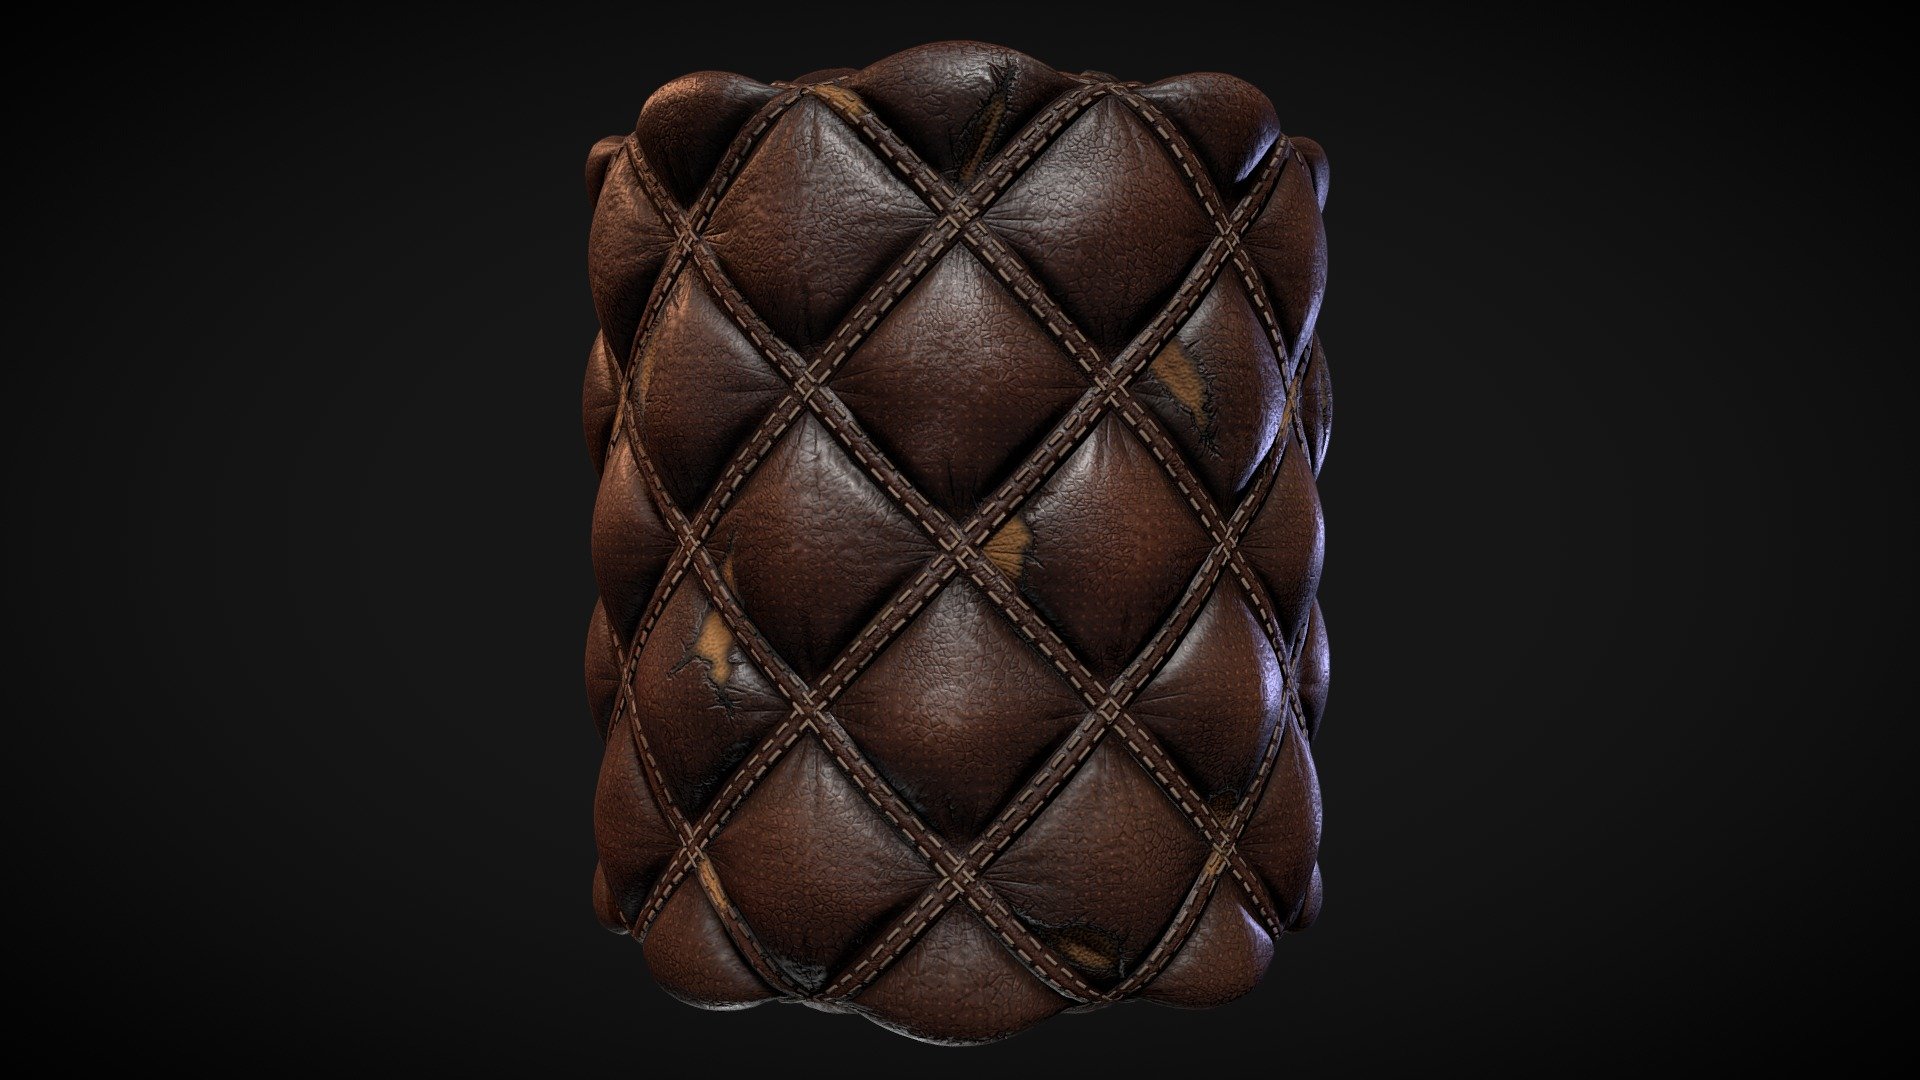 Padded leather material made in substance designer - Padded Leather Diamond Material - Buy Royalty Free 3D model by FarzinArshadi 3d model